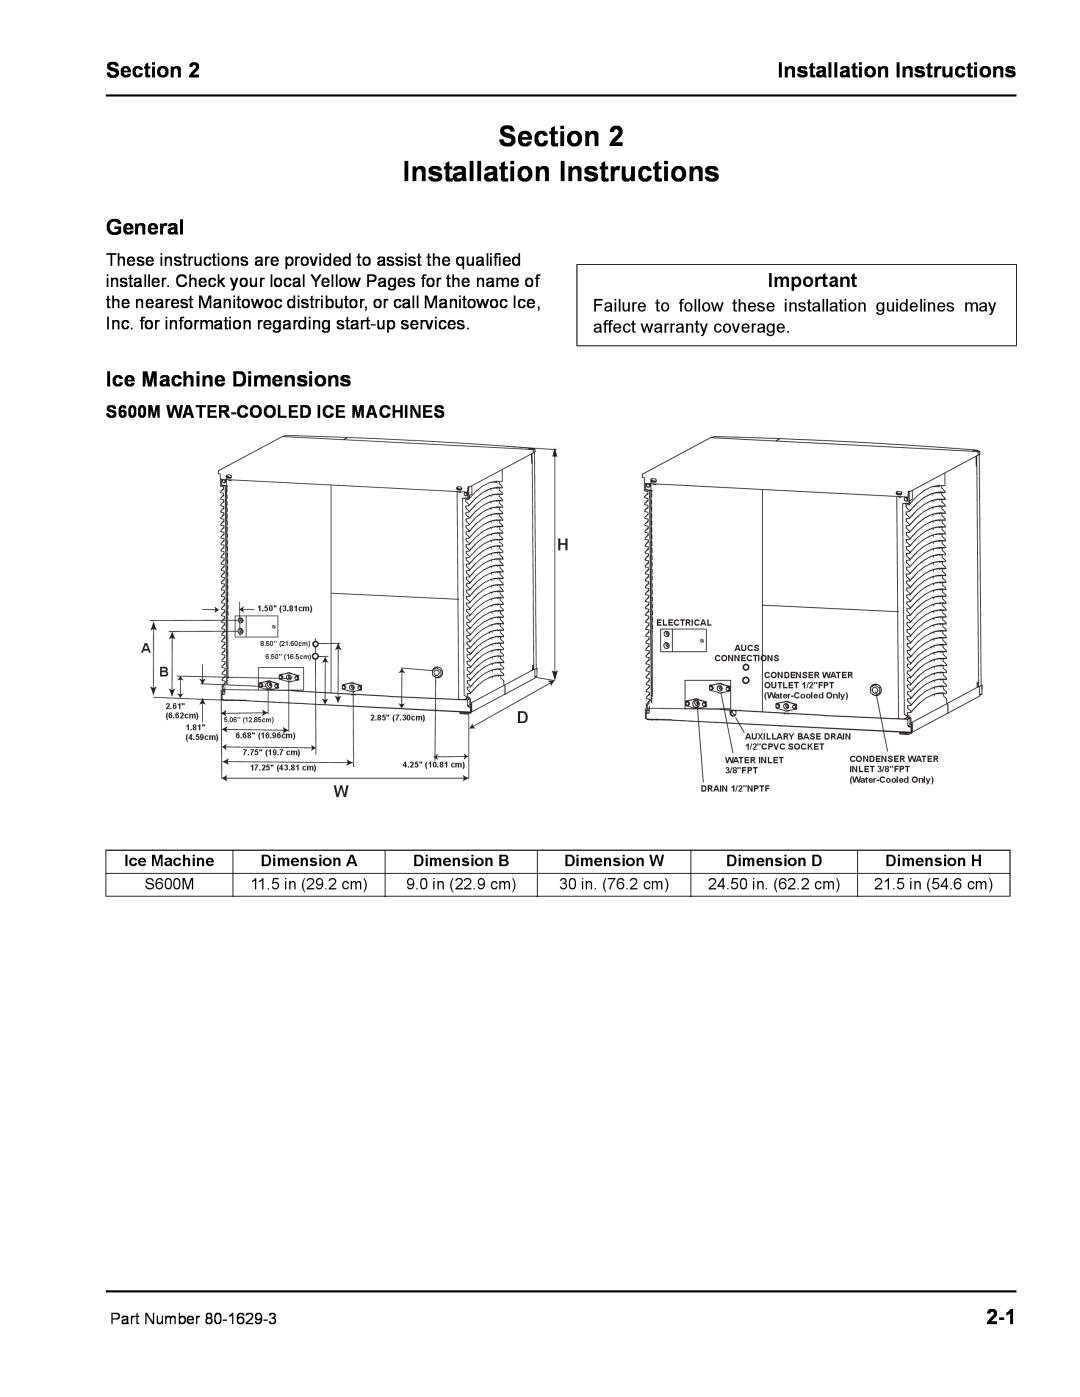 Manitowoc Ice manual Section Installation Instructions, General, Ice Machine Dimensions, S600M WATER-COOLED ICE MACHINES 